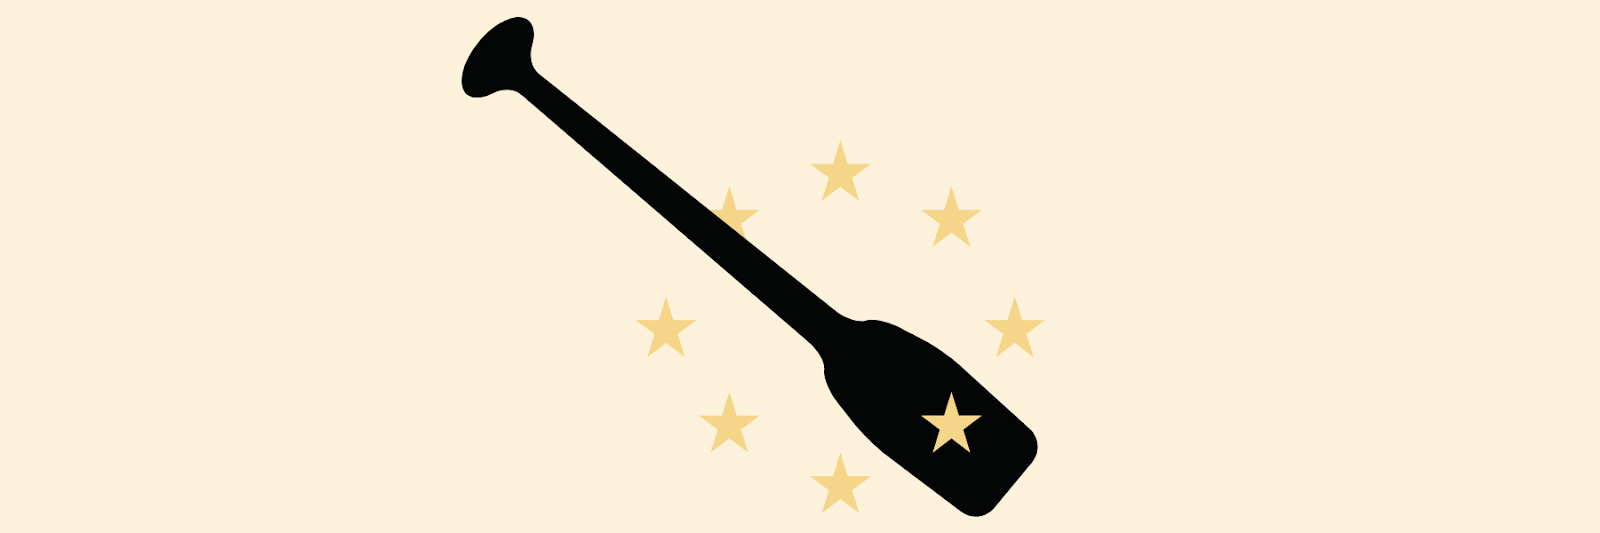 a black oar on a pale yellow background, with a ring of gold stars